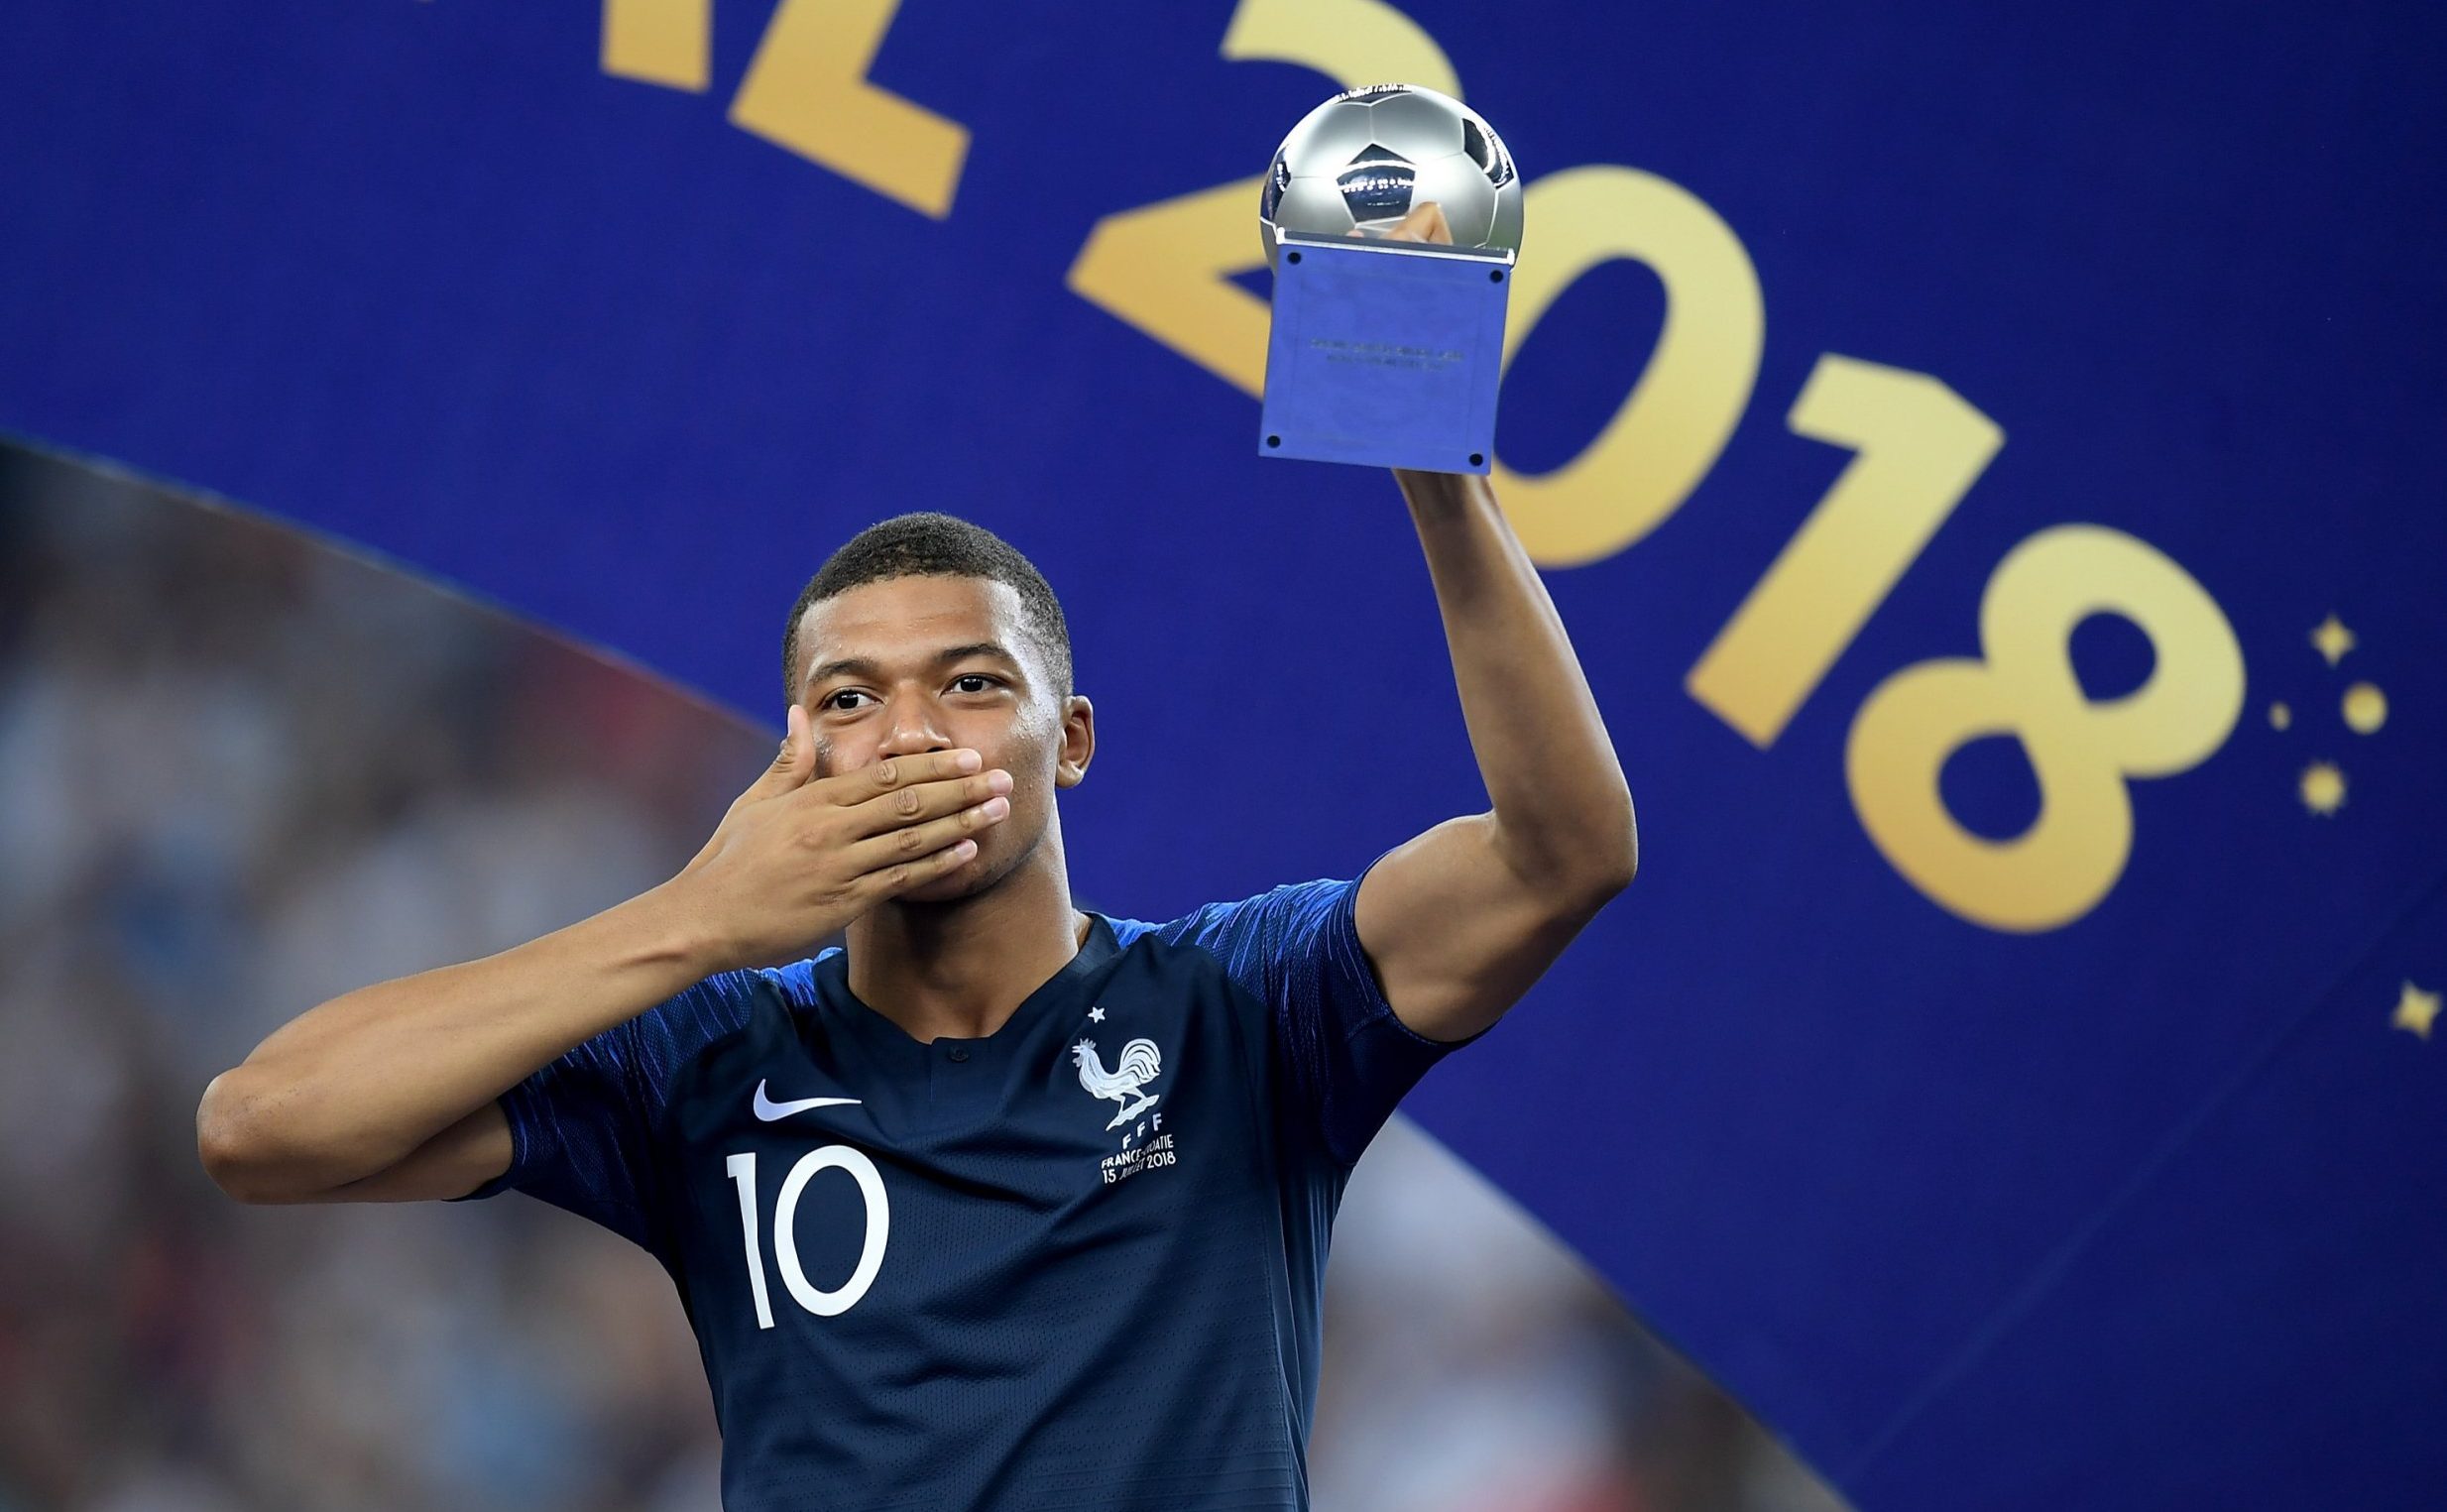 Kylian Mbappe rates his chances of joining Real Madrid after winning World Cup with France